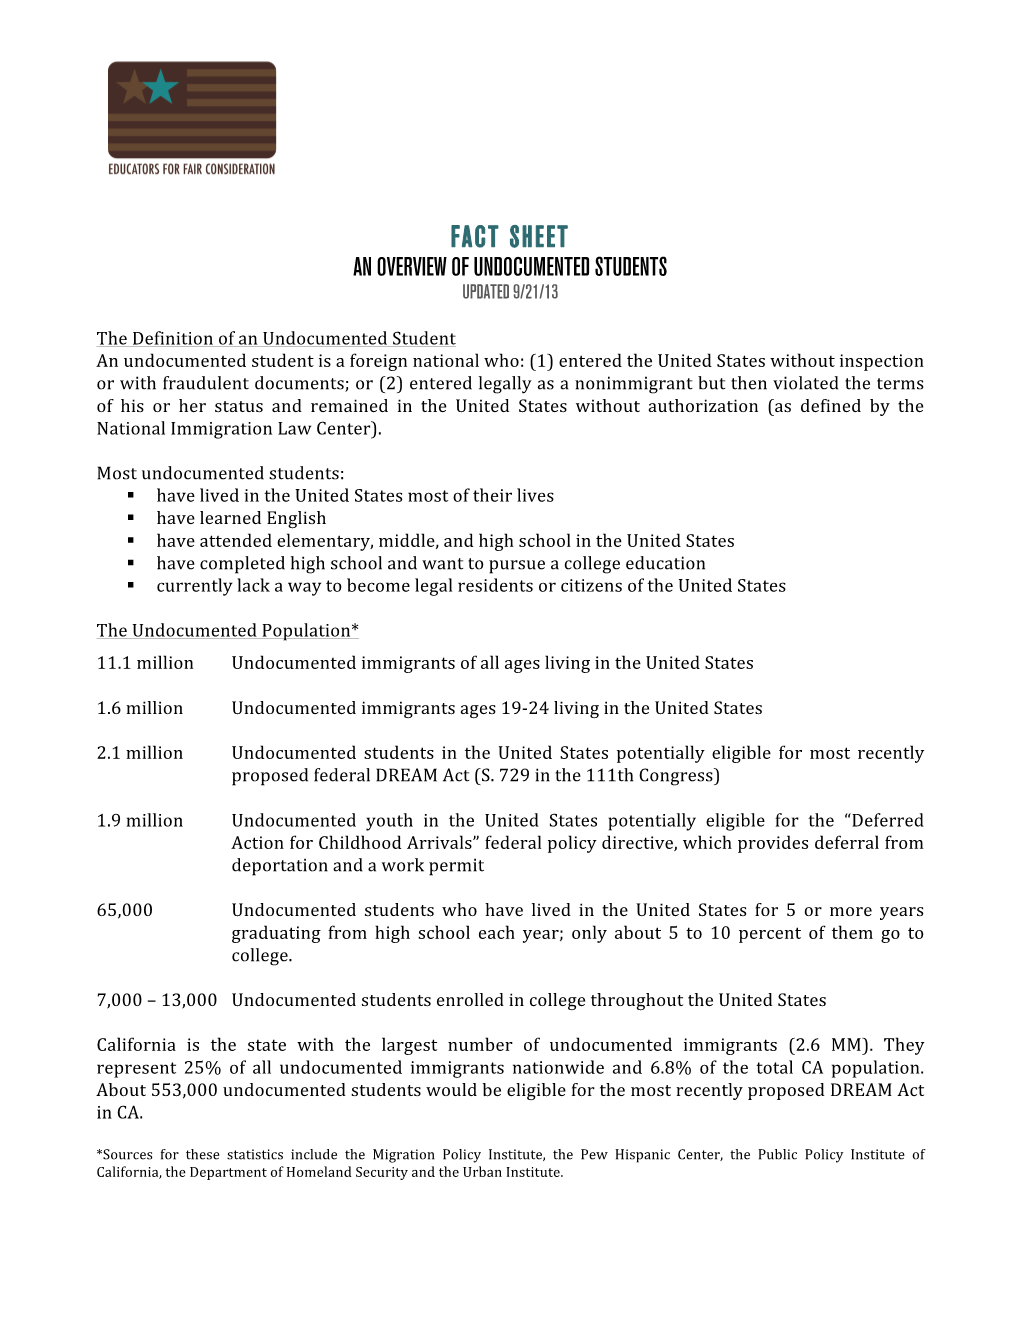 Fact Sheet an Overview of Undocumented Students Updated 9/21/13